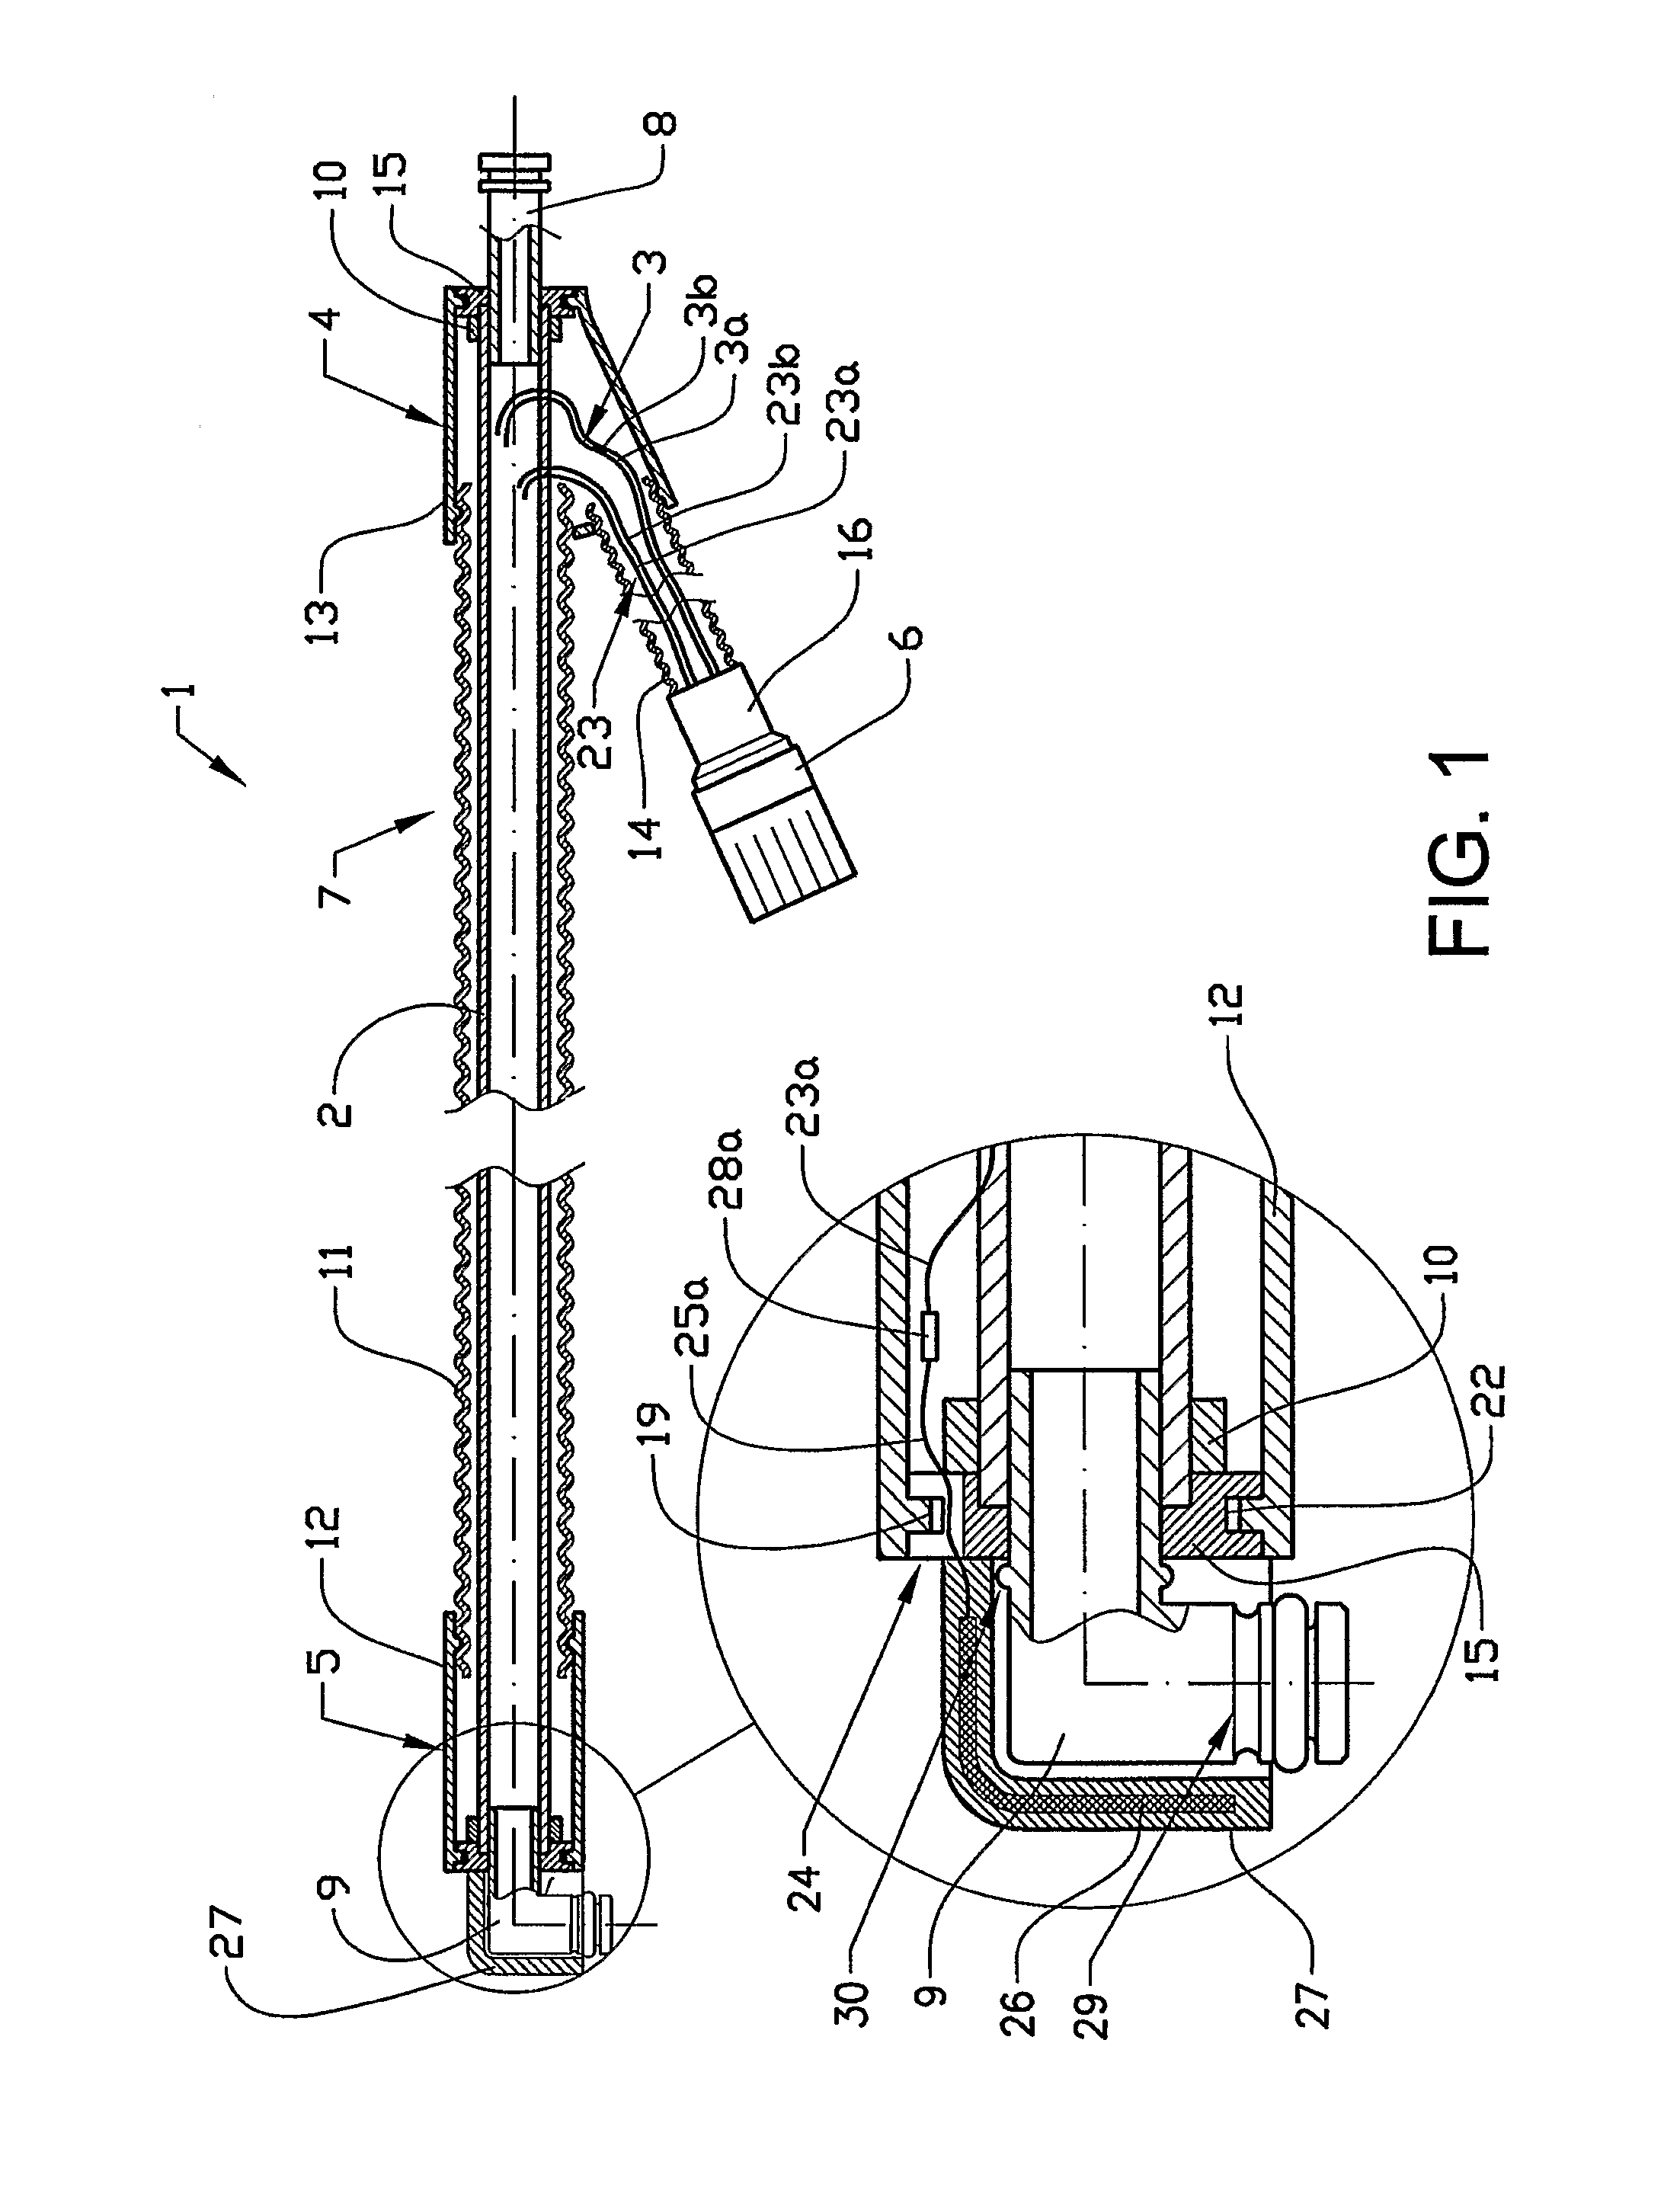 Heated coupling